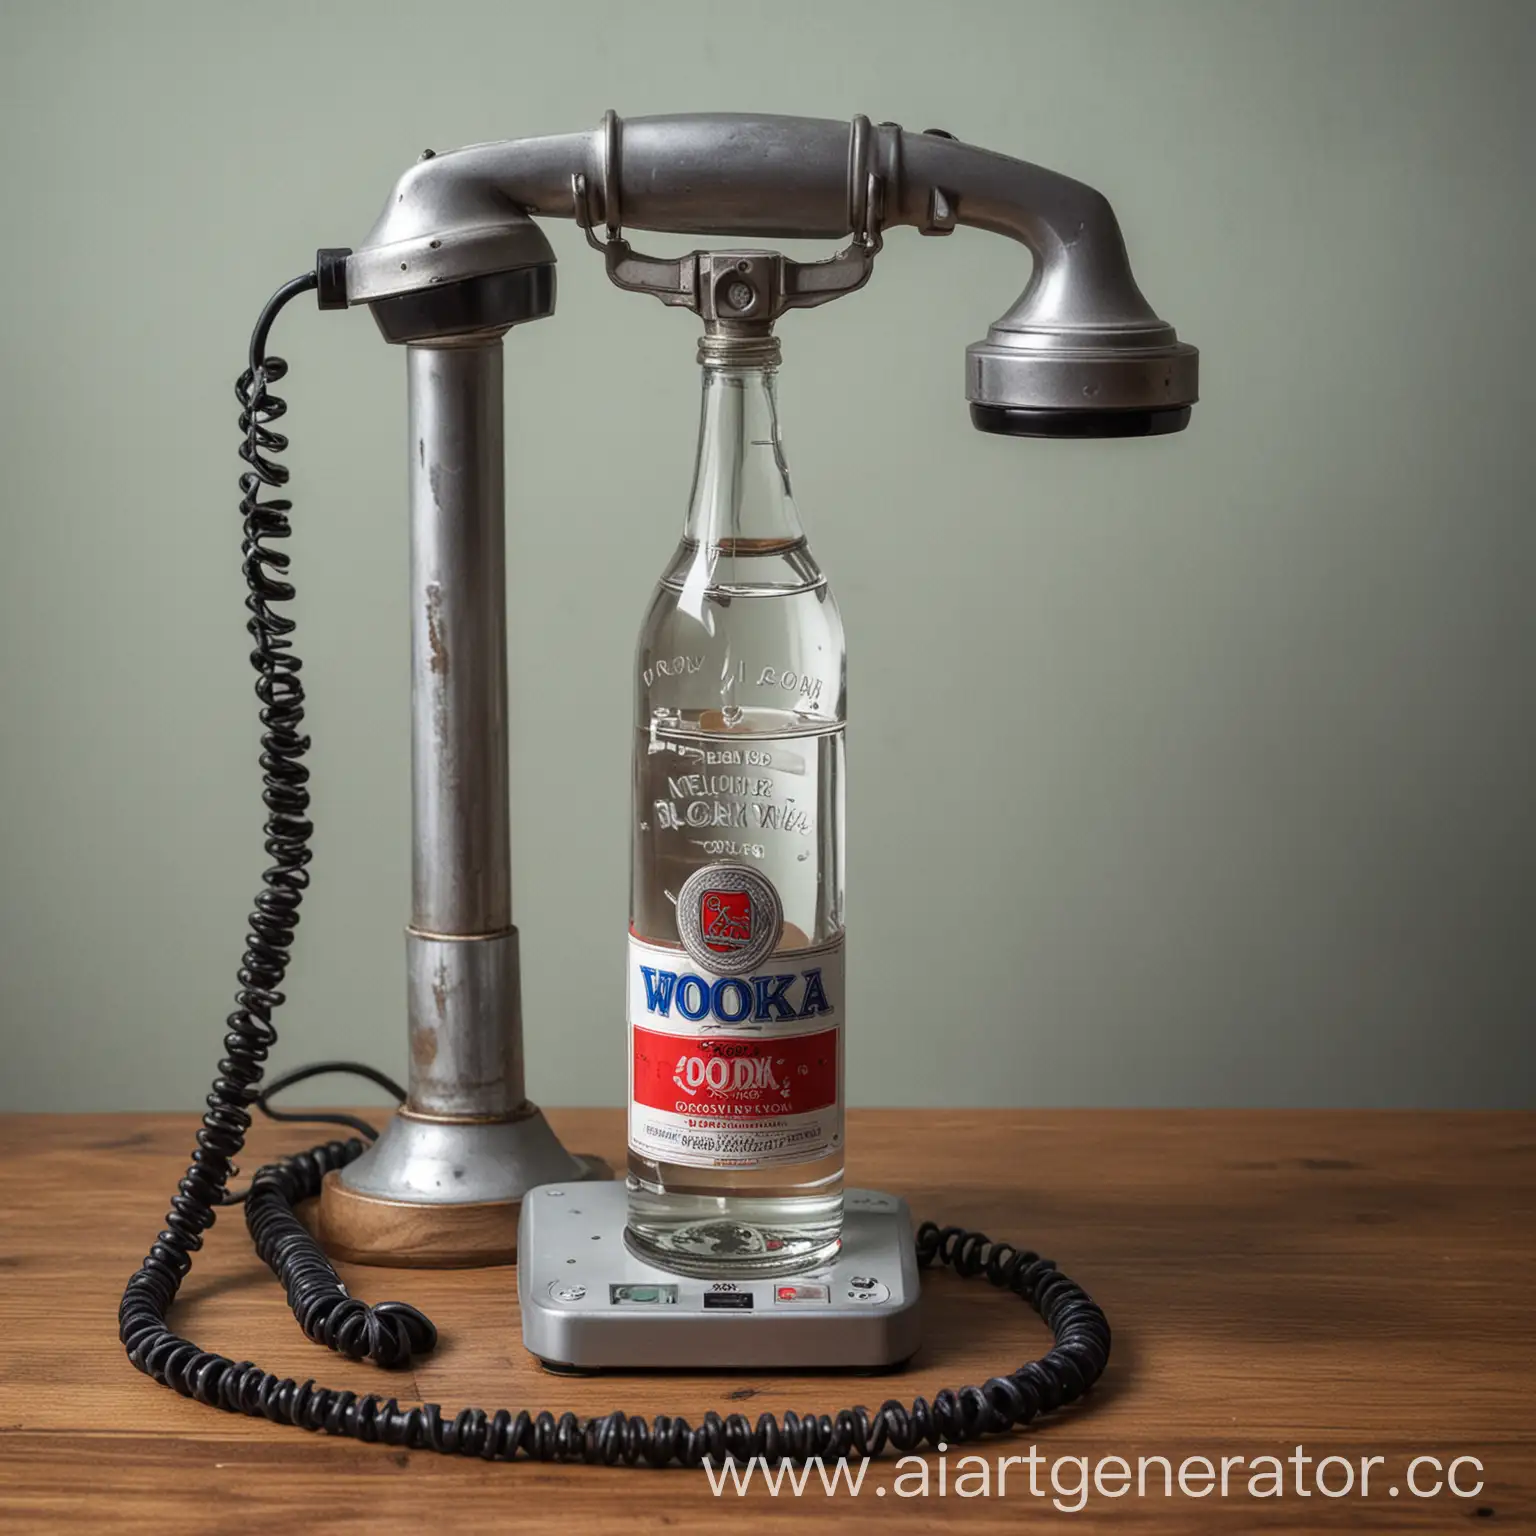 Abstract-Vodka-Bottle-Connected-by-Telephone-Lines